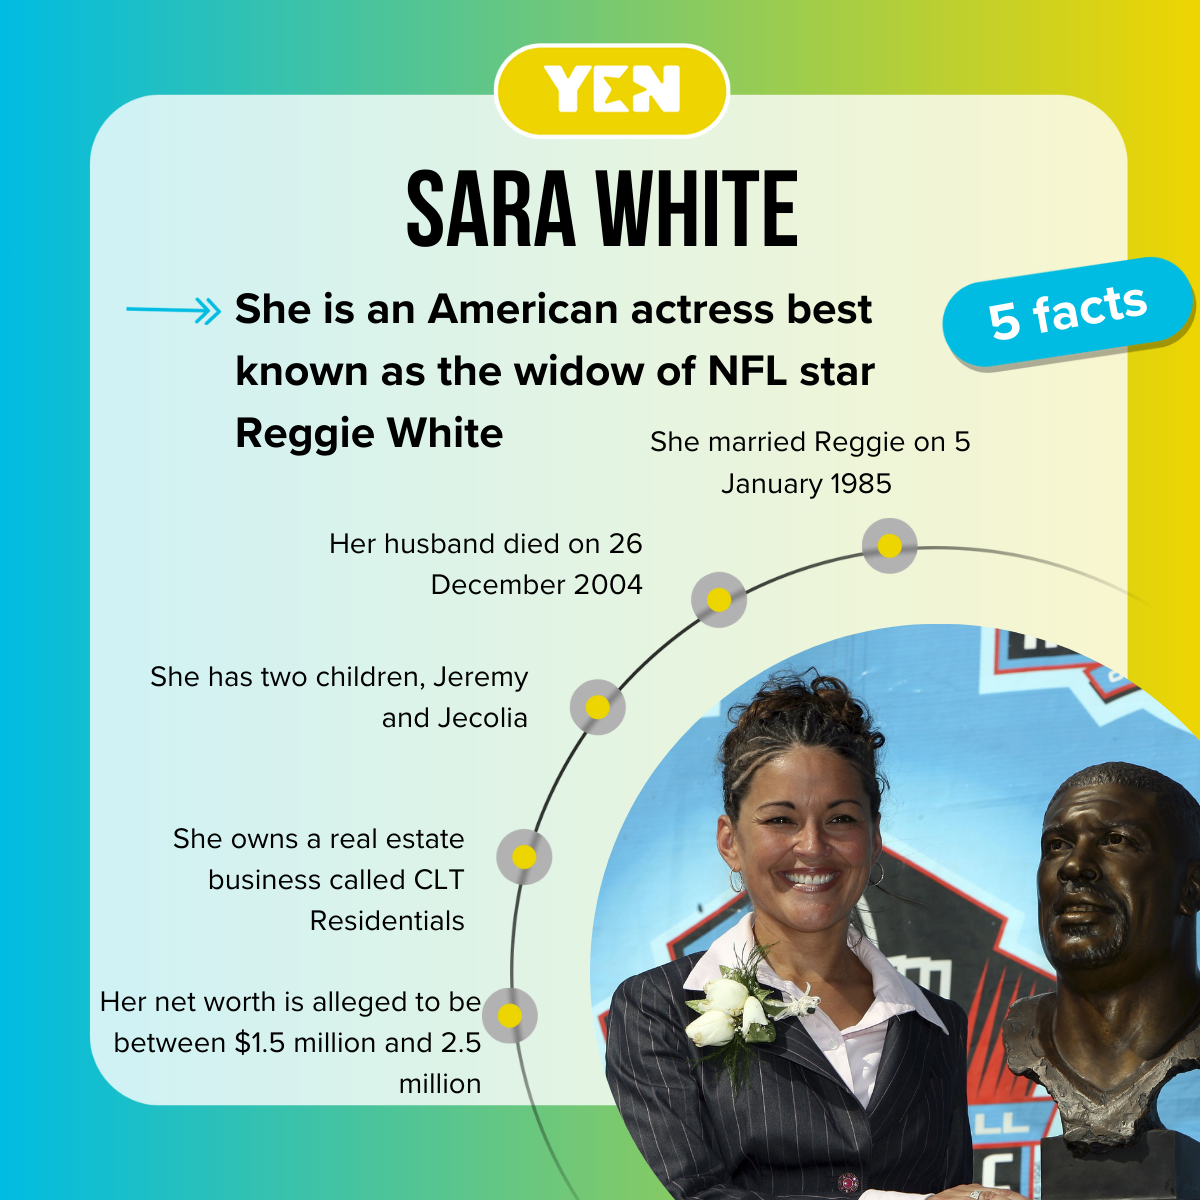 Five facts about Sara White